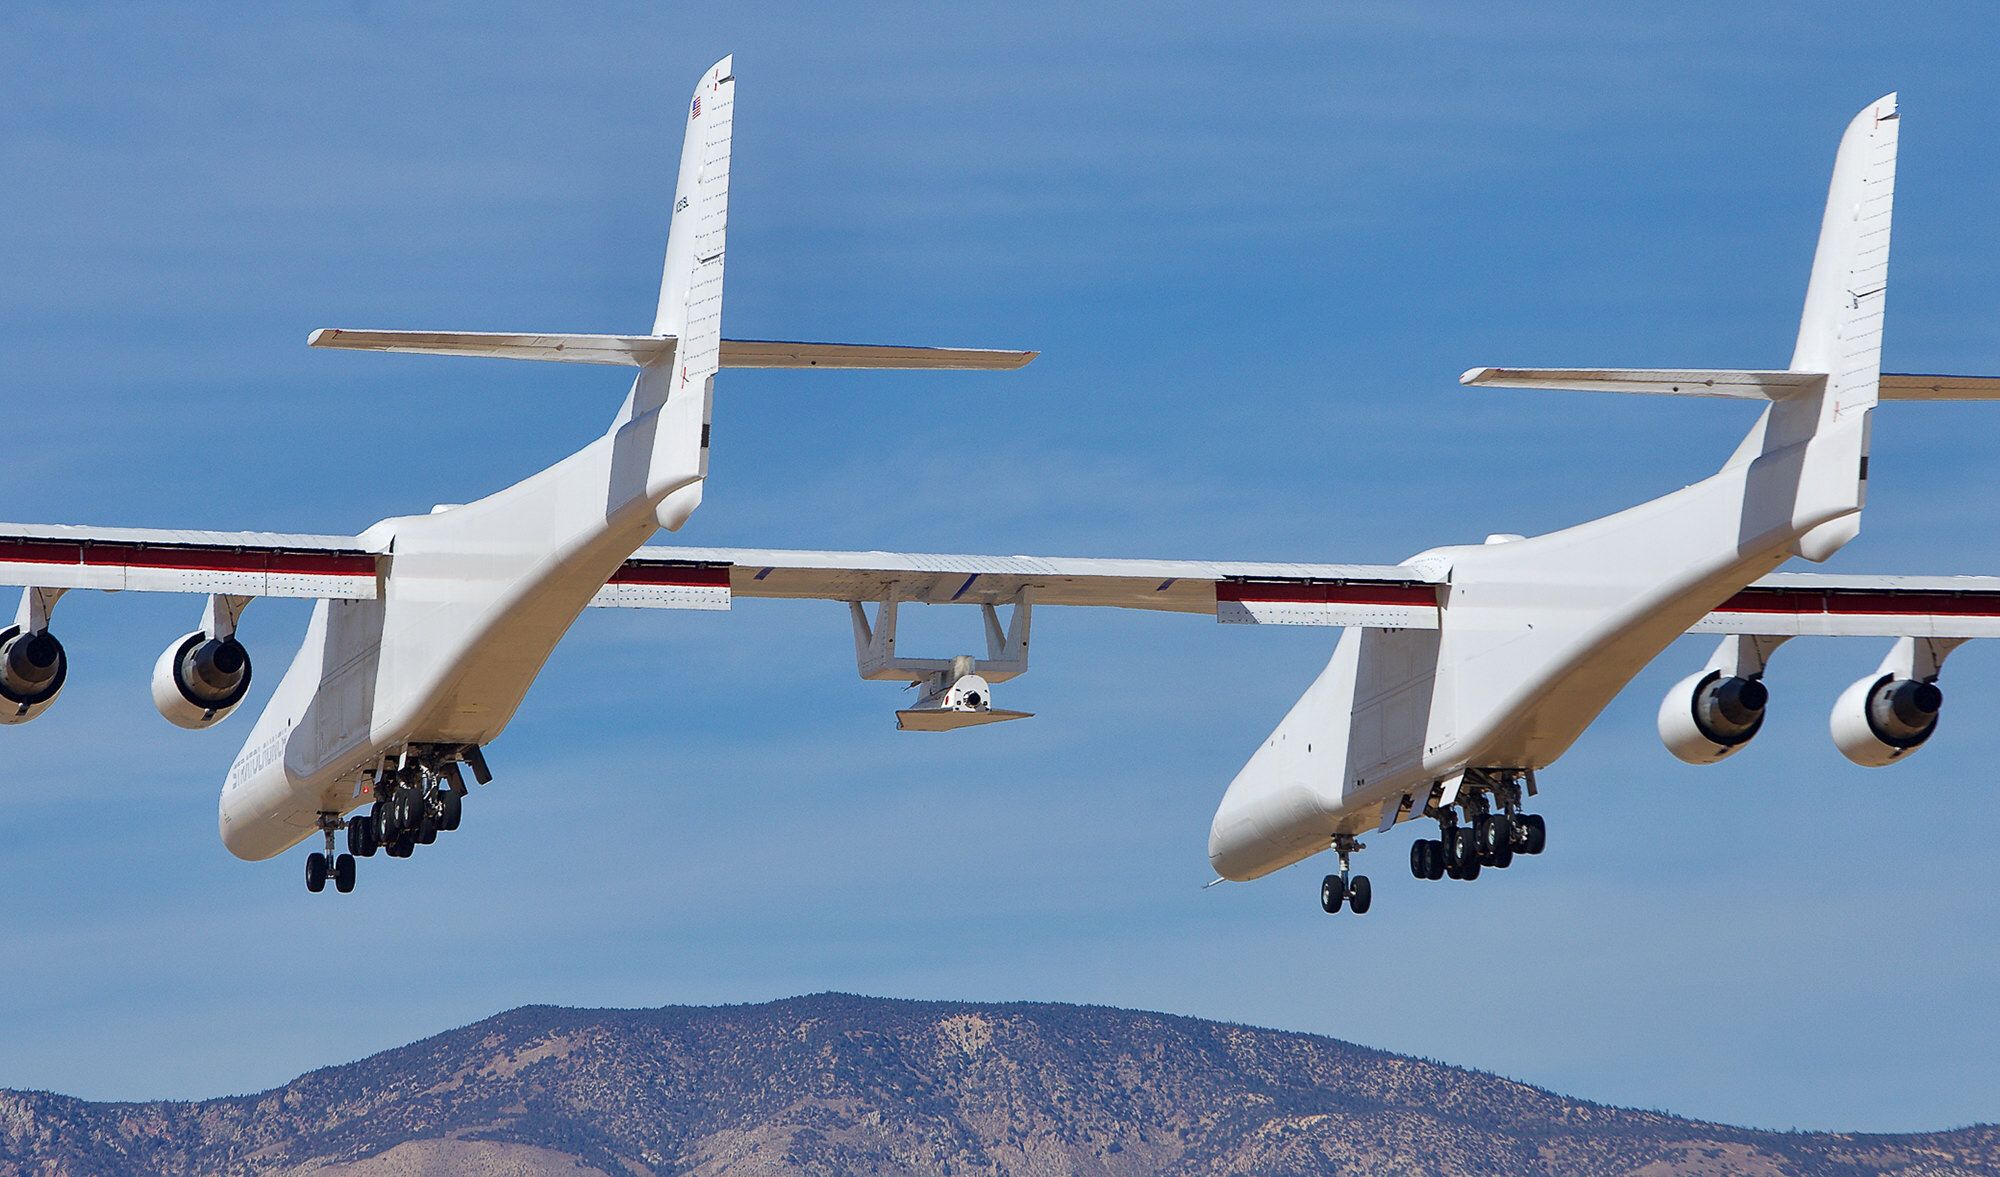 Stratolaunch's Roc about to land after a test flight